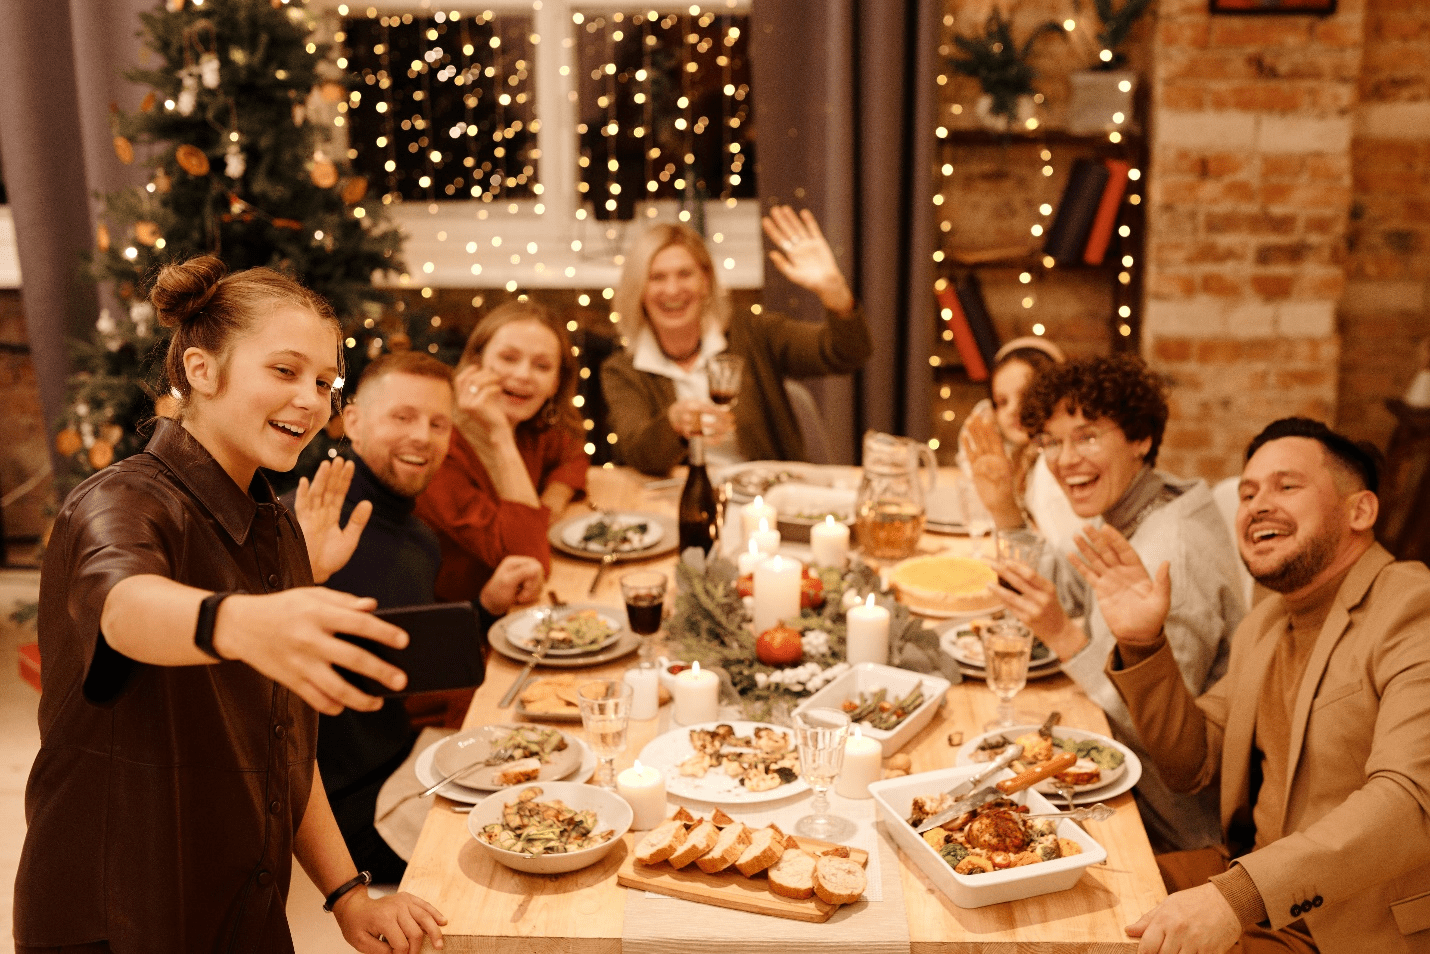 A group of friends enjoying a holiday feast